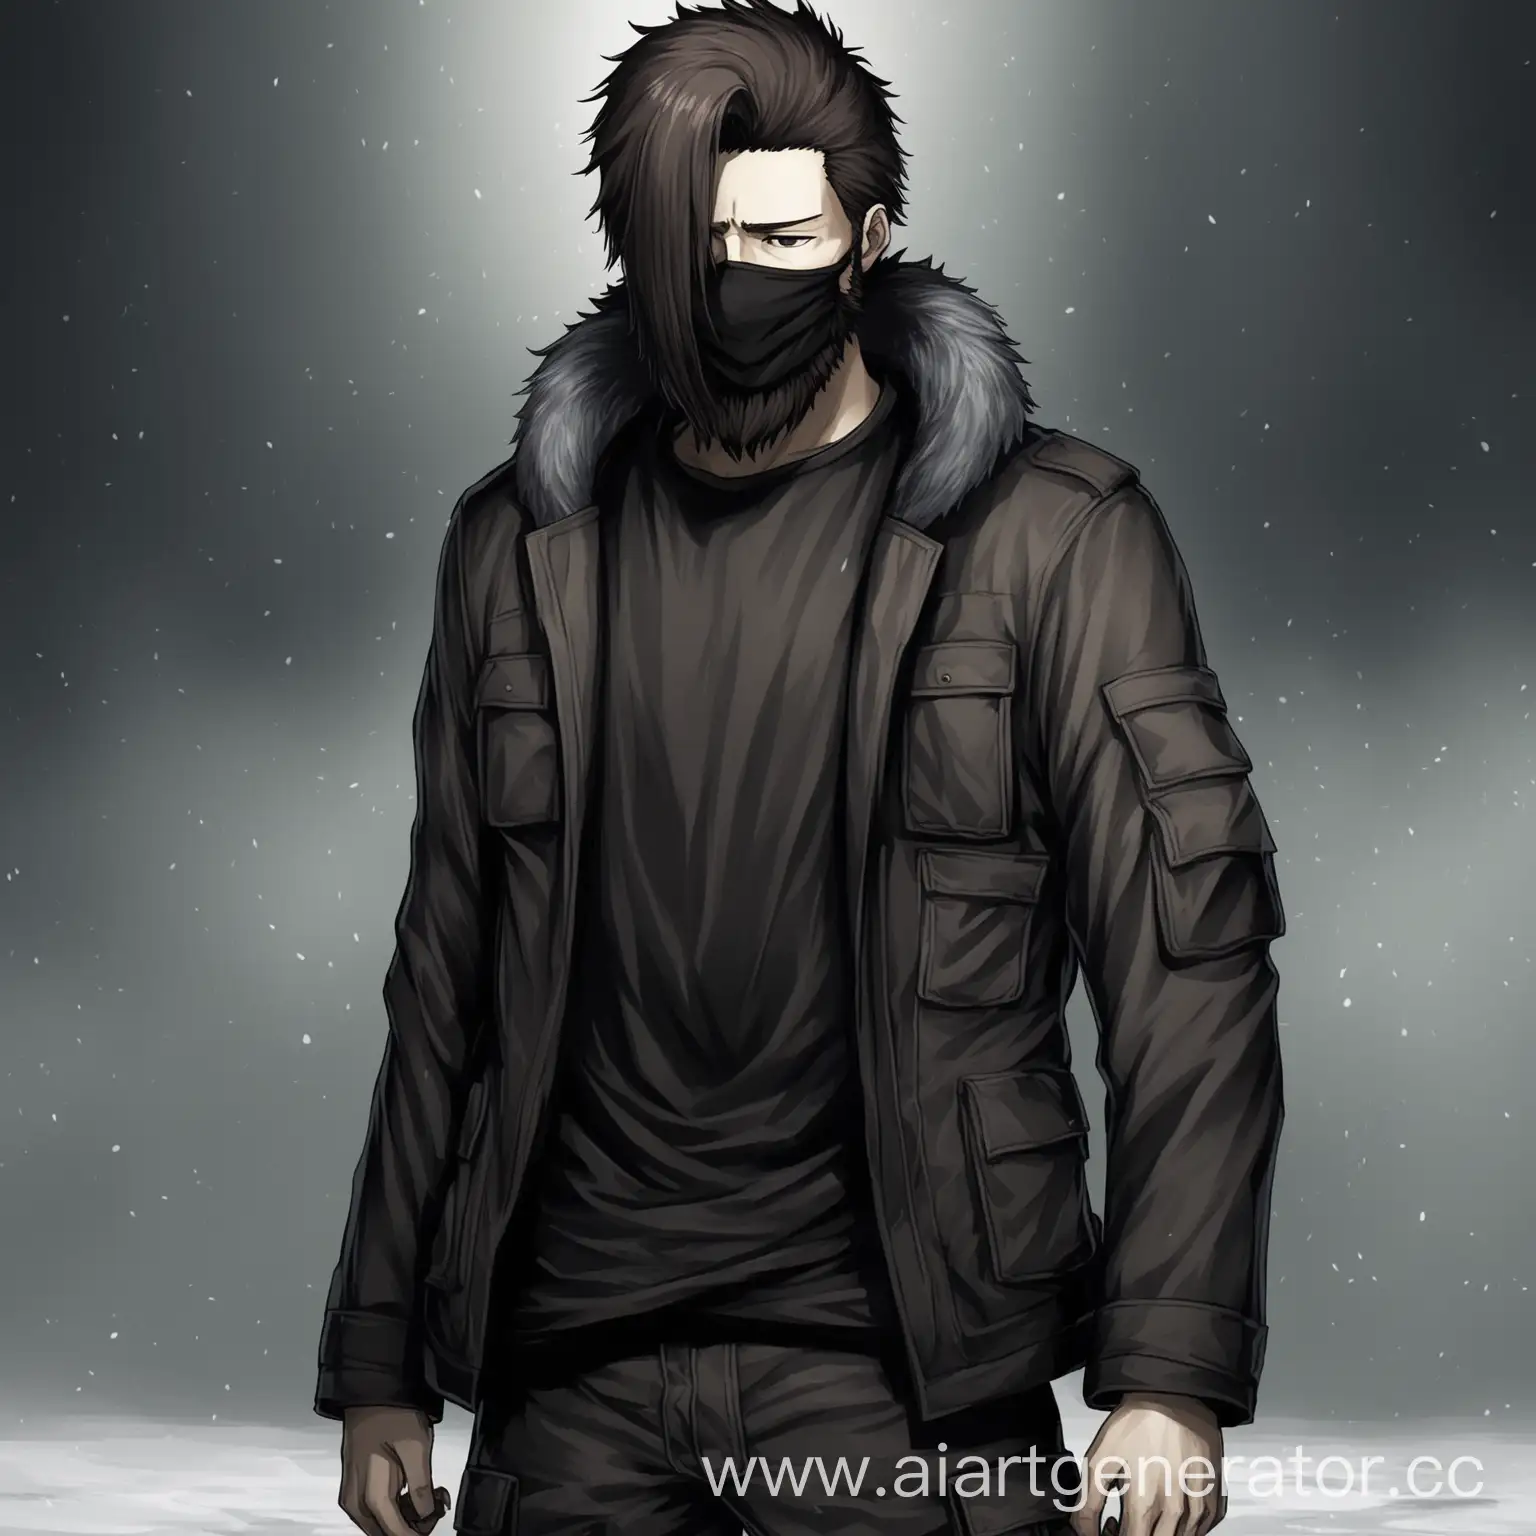 Kusunoki-Mysterious-Figure-in-Urban-Attire-with-Concealed-Identity